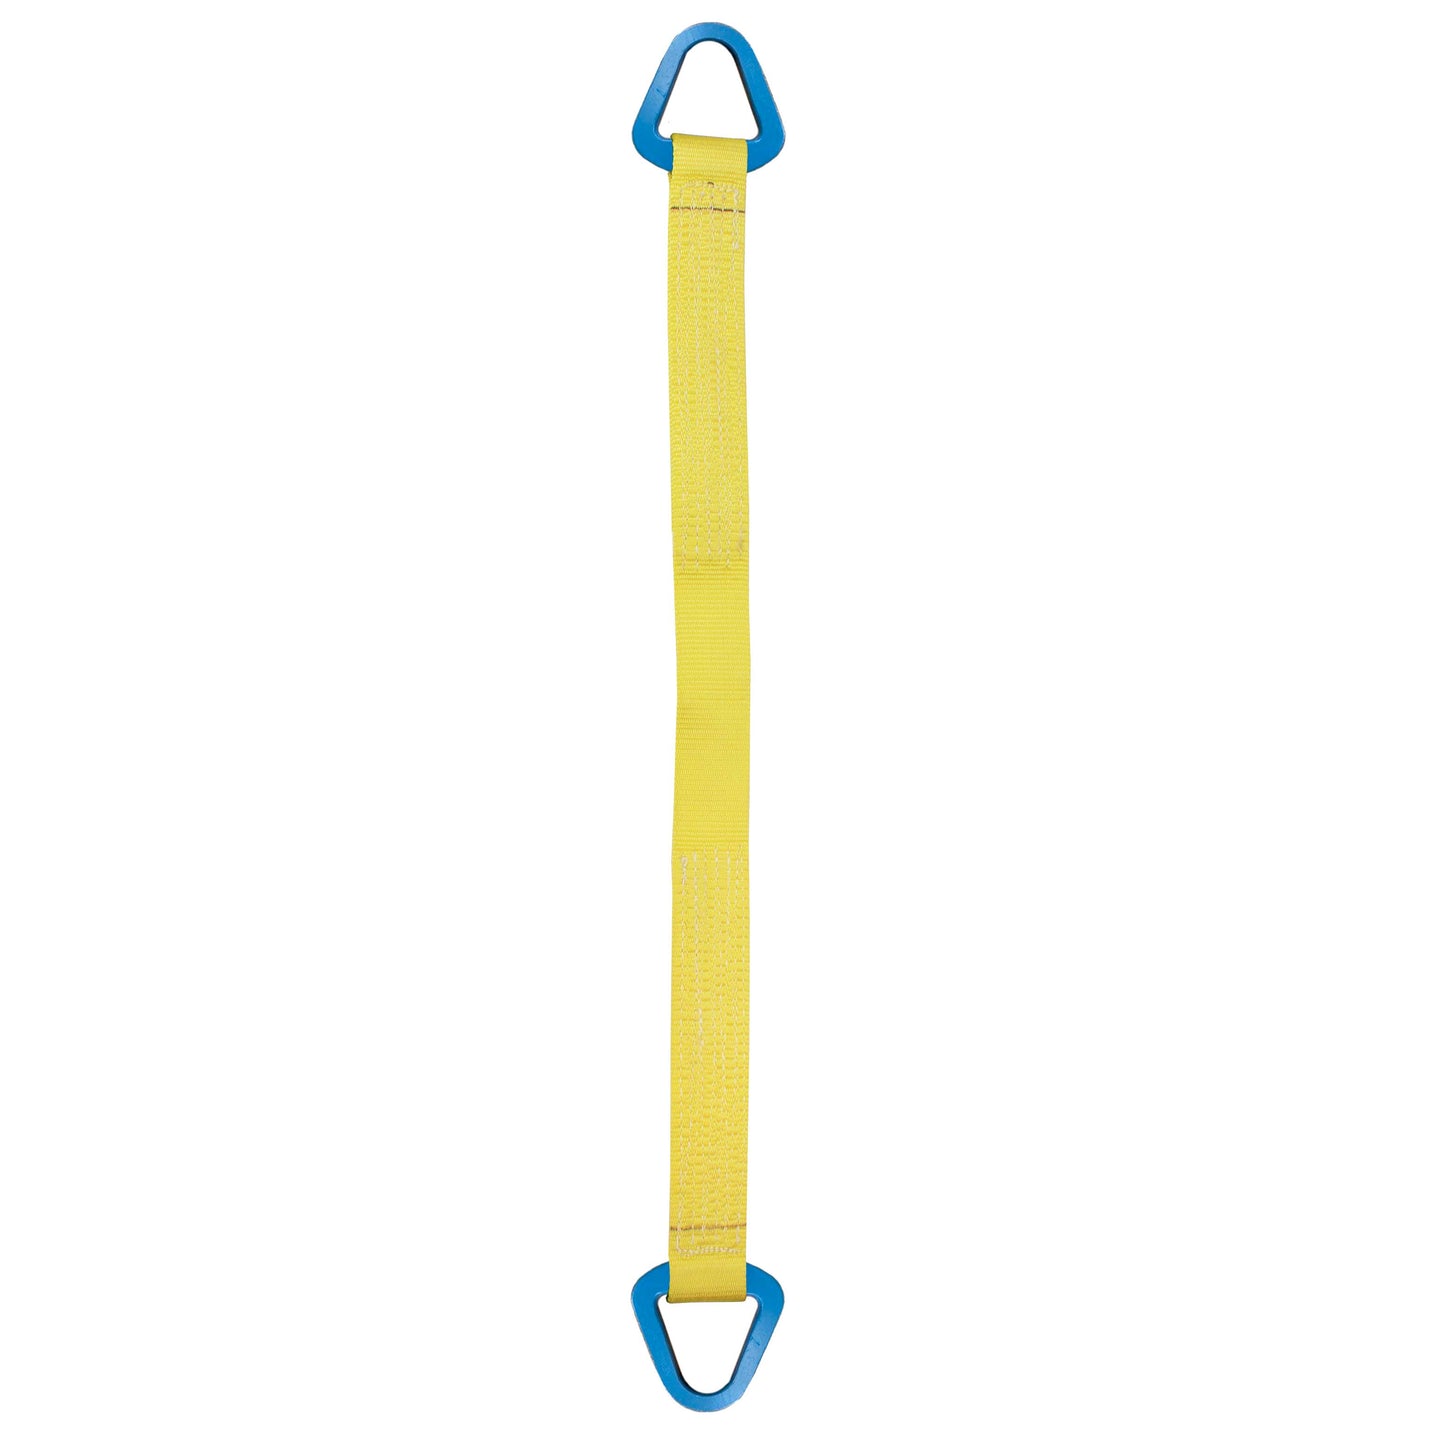 Nylon Lifting Sling Triangle 8 inch x 3 foot 1ply image 1 of 2